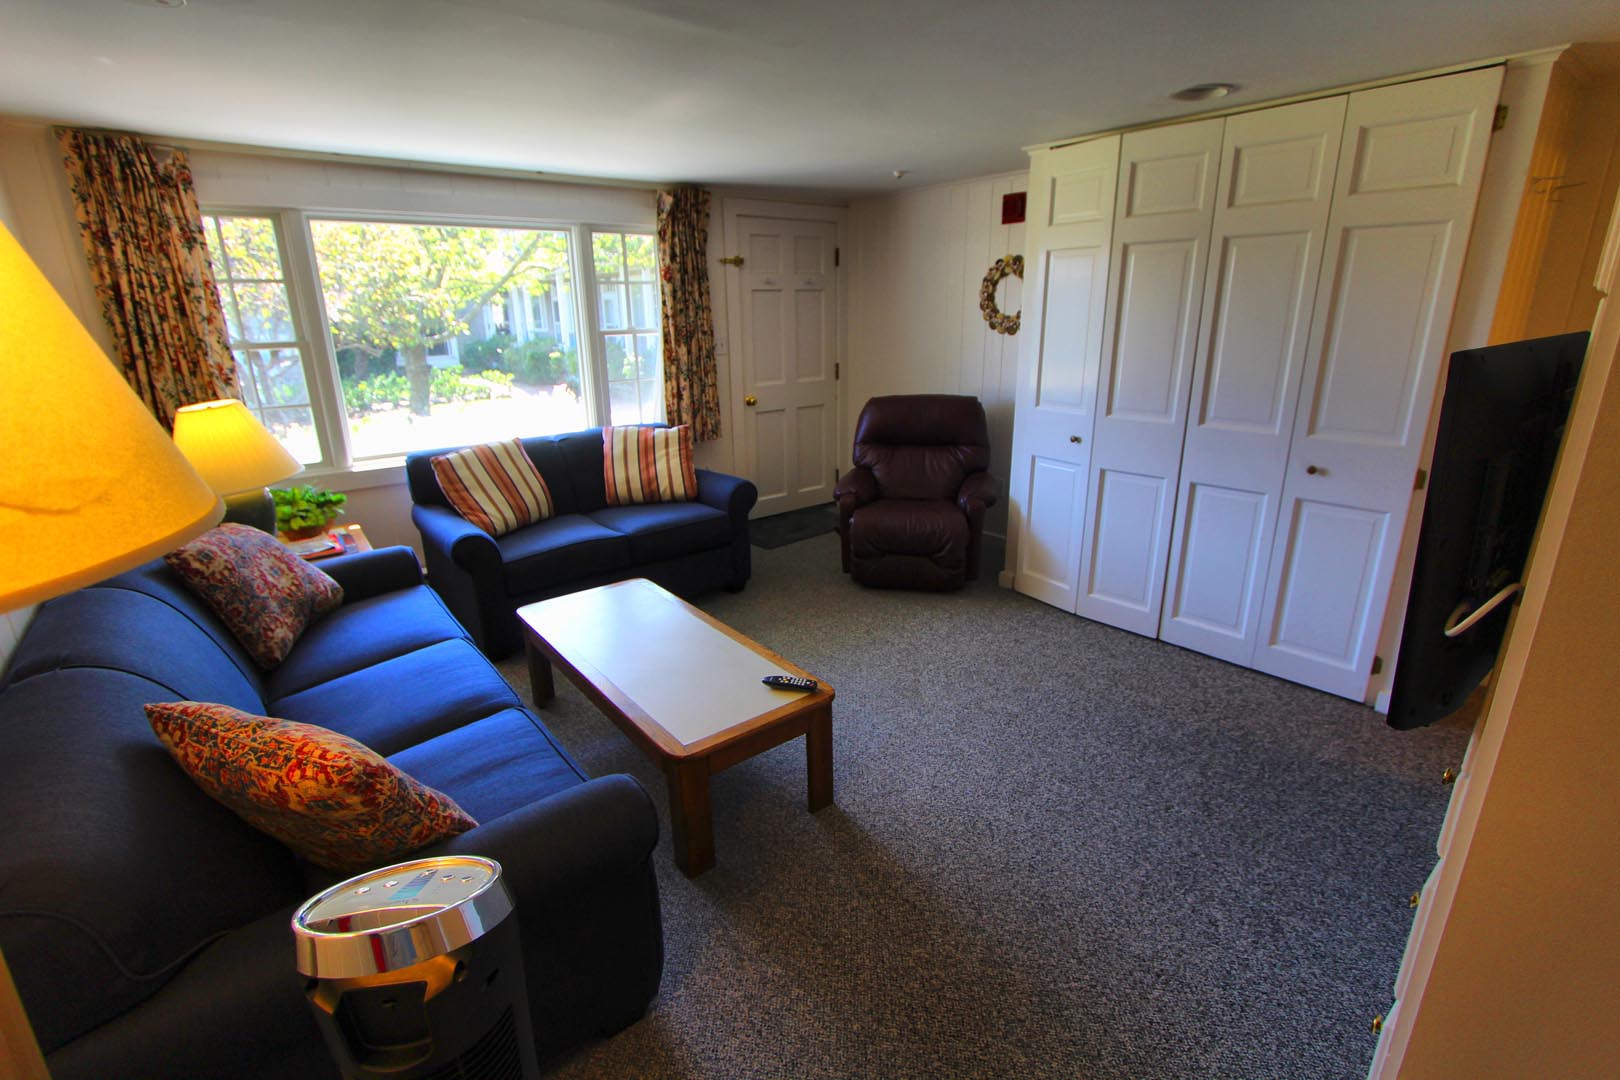 A cozy living room area at VRI's Brant Point Courtyard in Massachusetts.